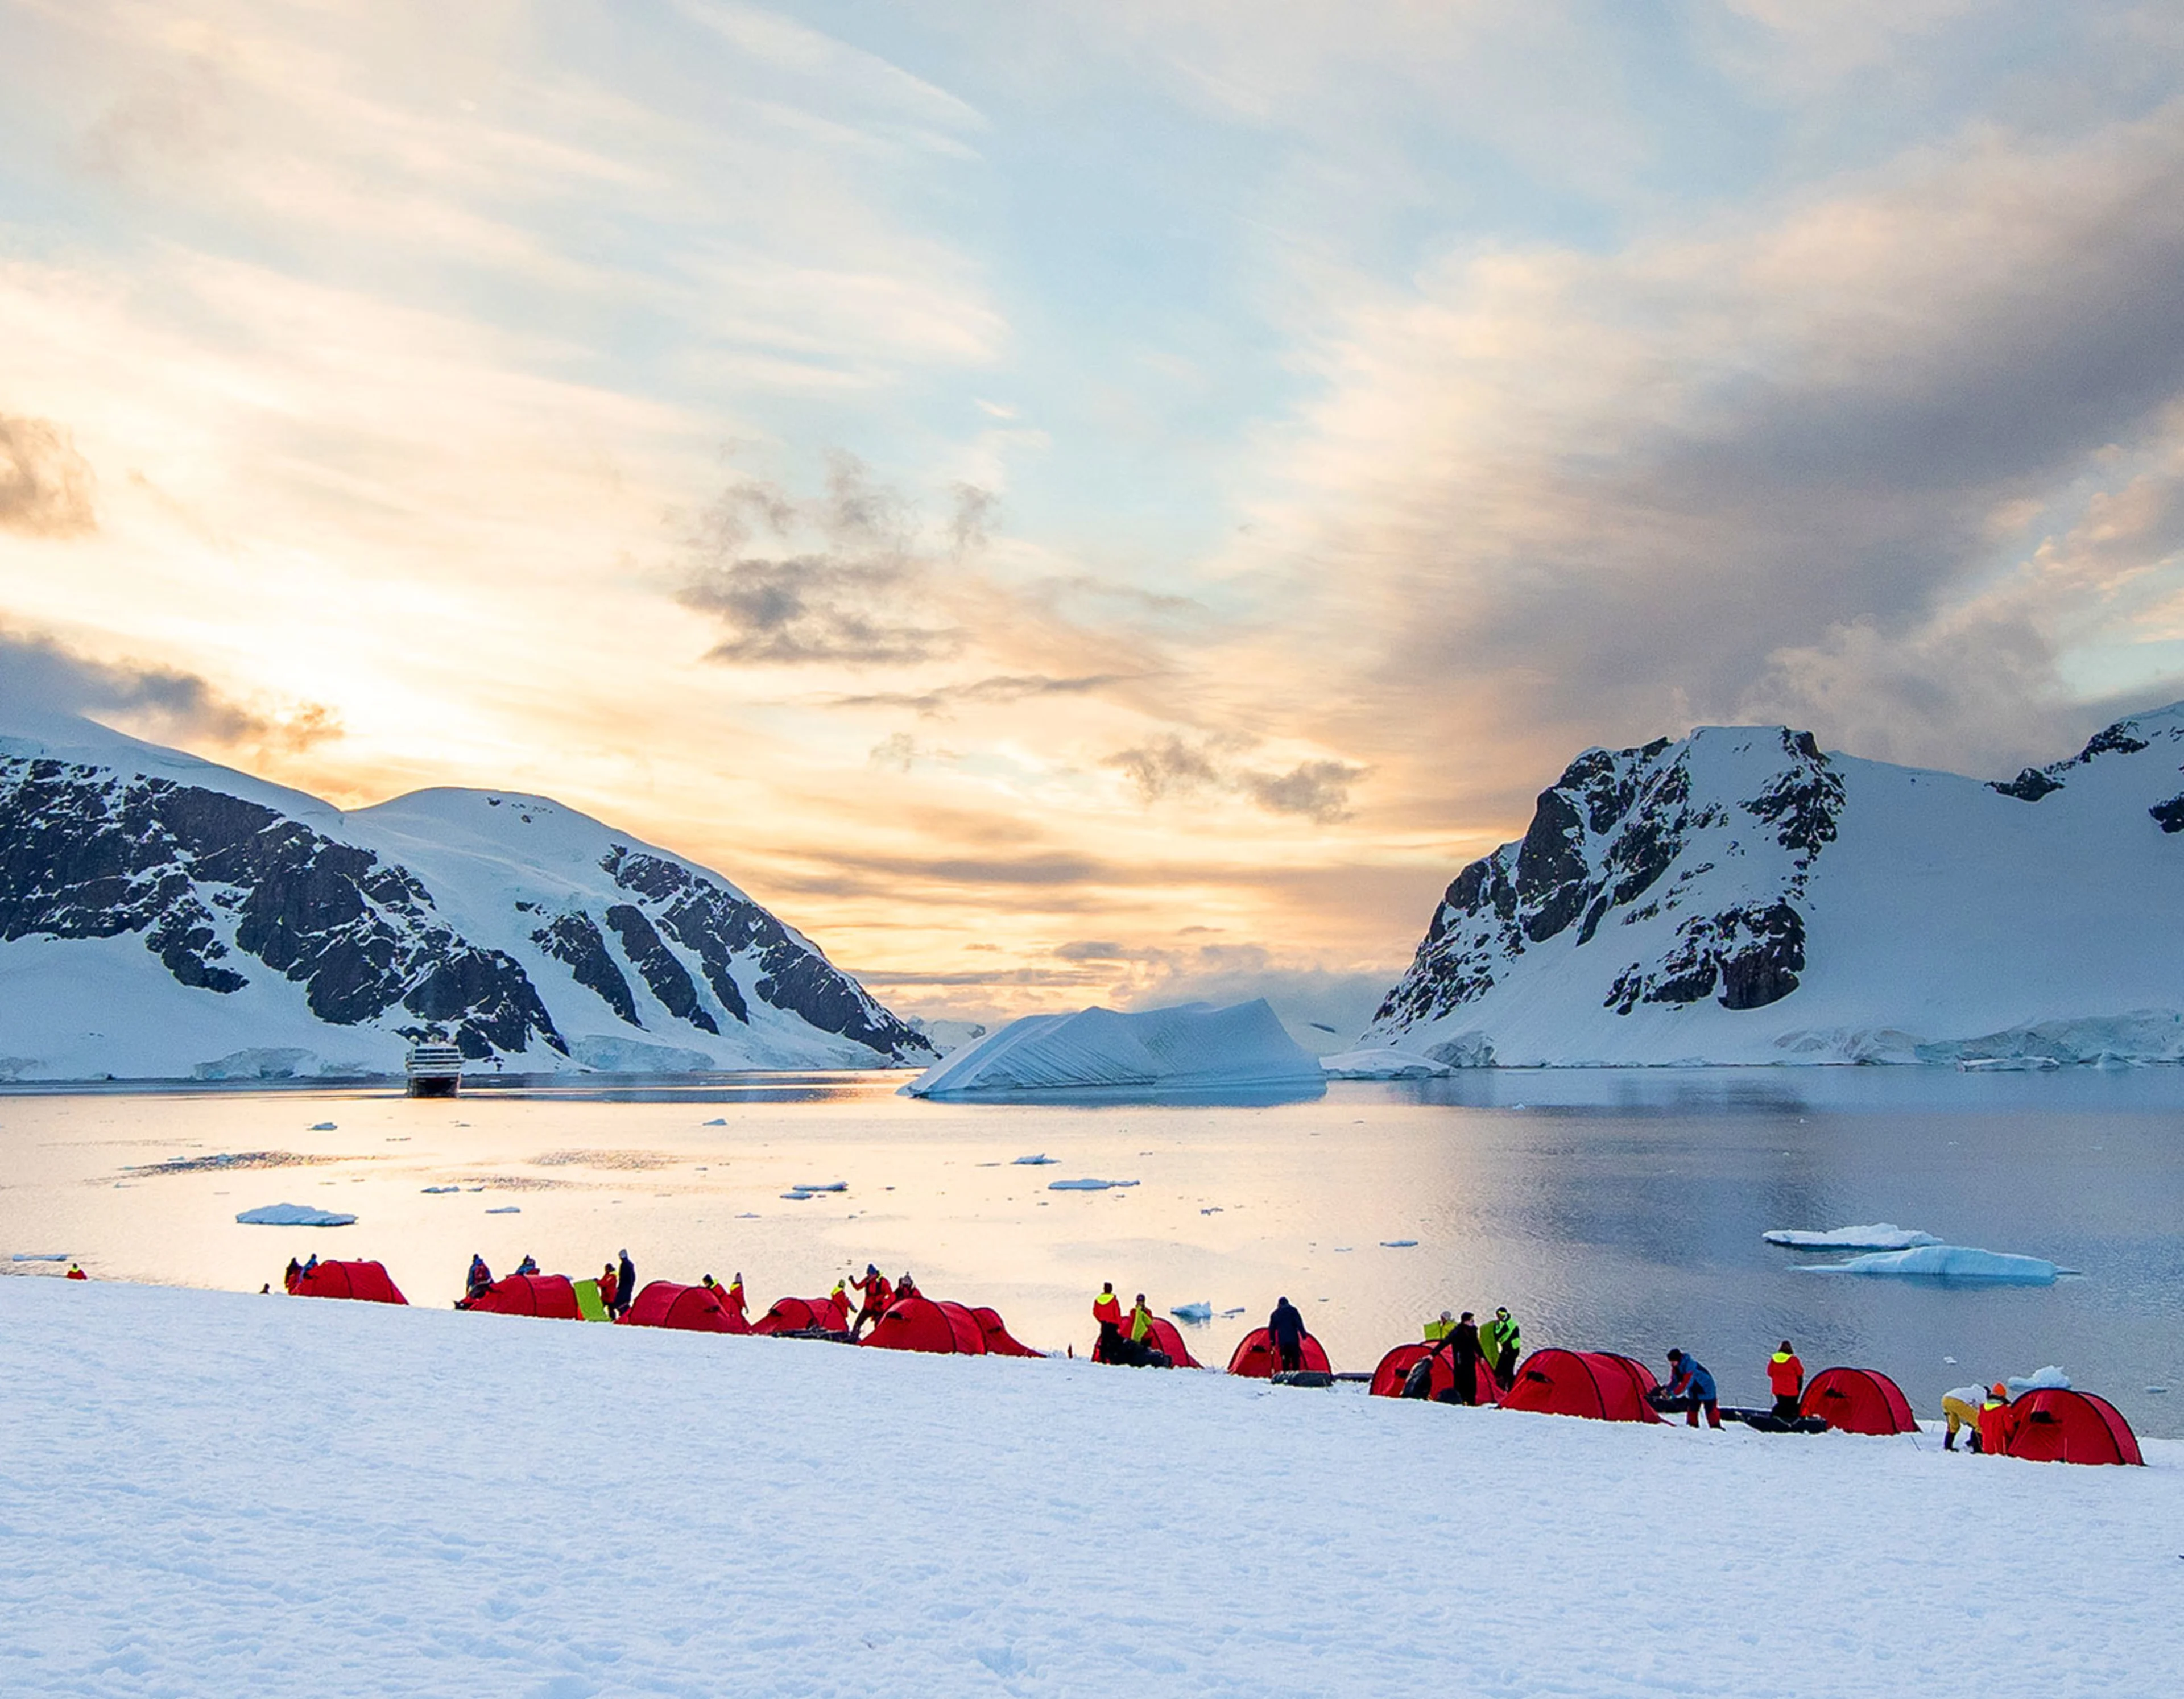 Red tents on the Antarctic Peninsula, with a Sea view.